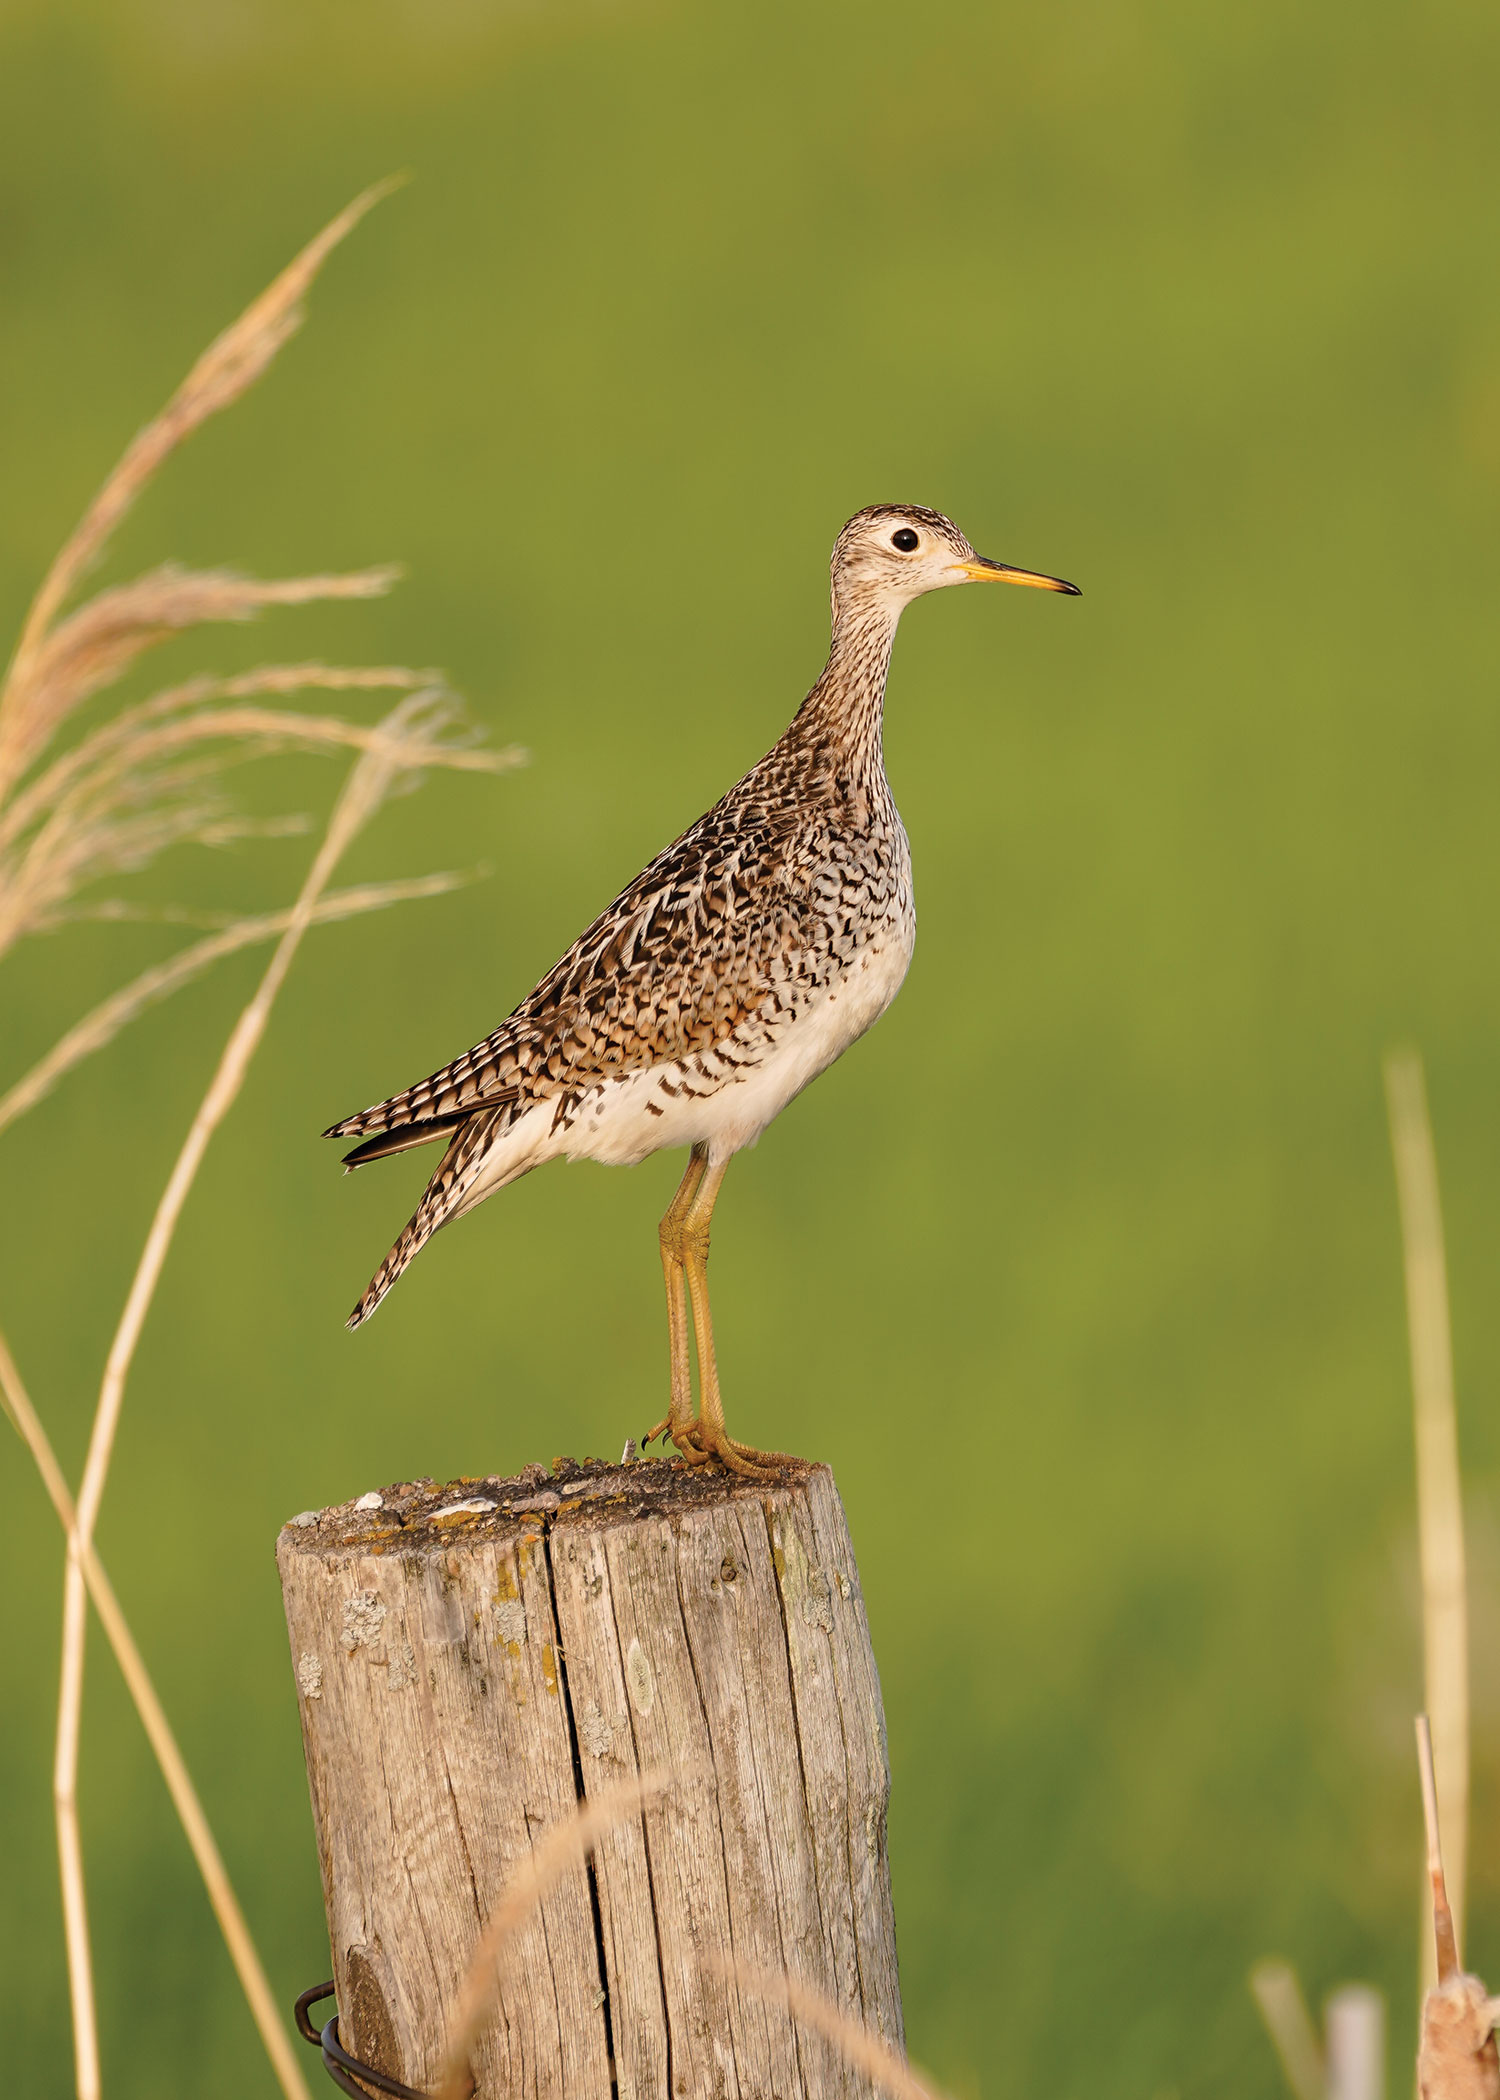 Upland sandpiper standing on a wood fencepost